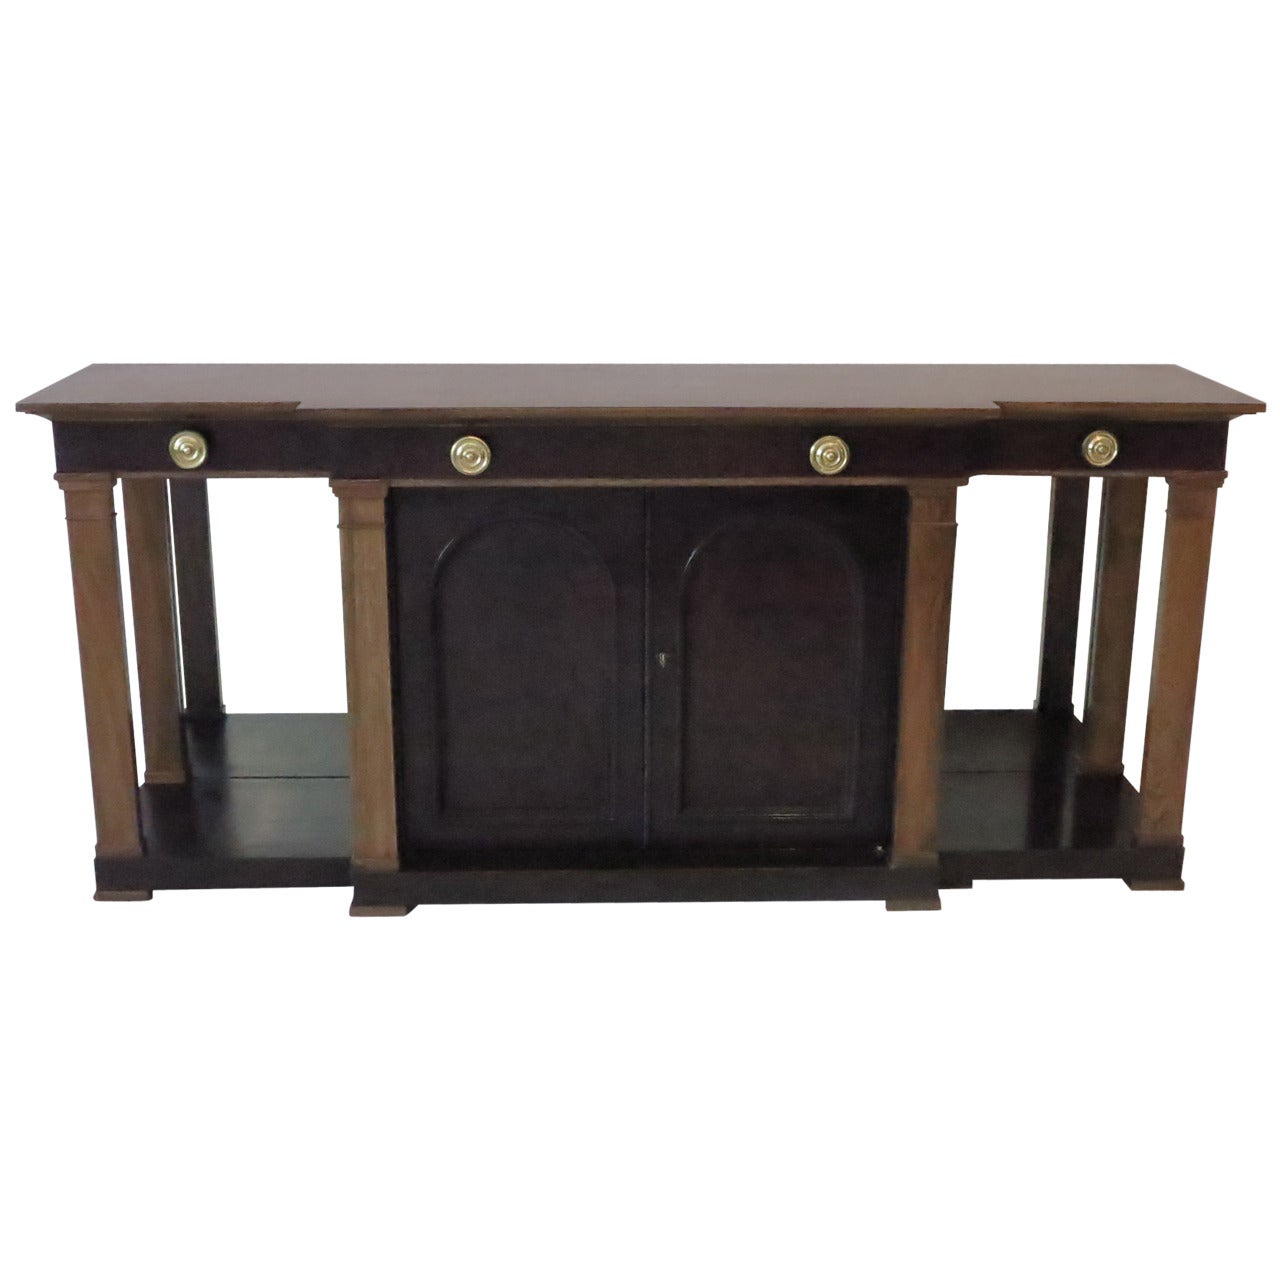 Rare Sideboard or Console Table by Edward Wormley for Dunbar